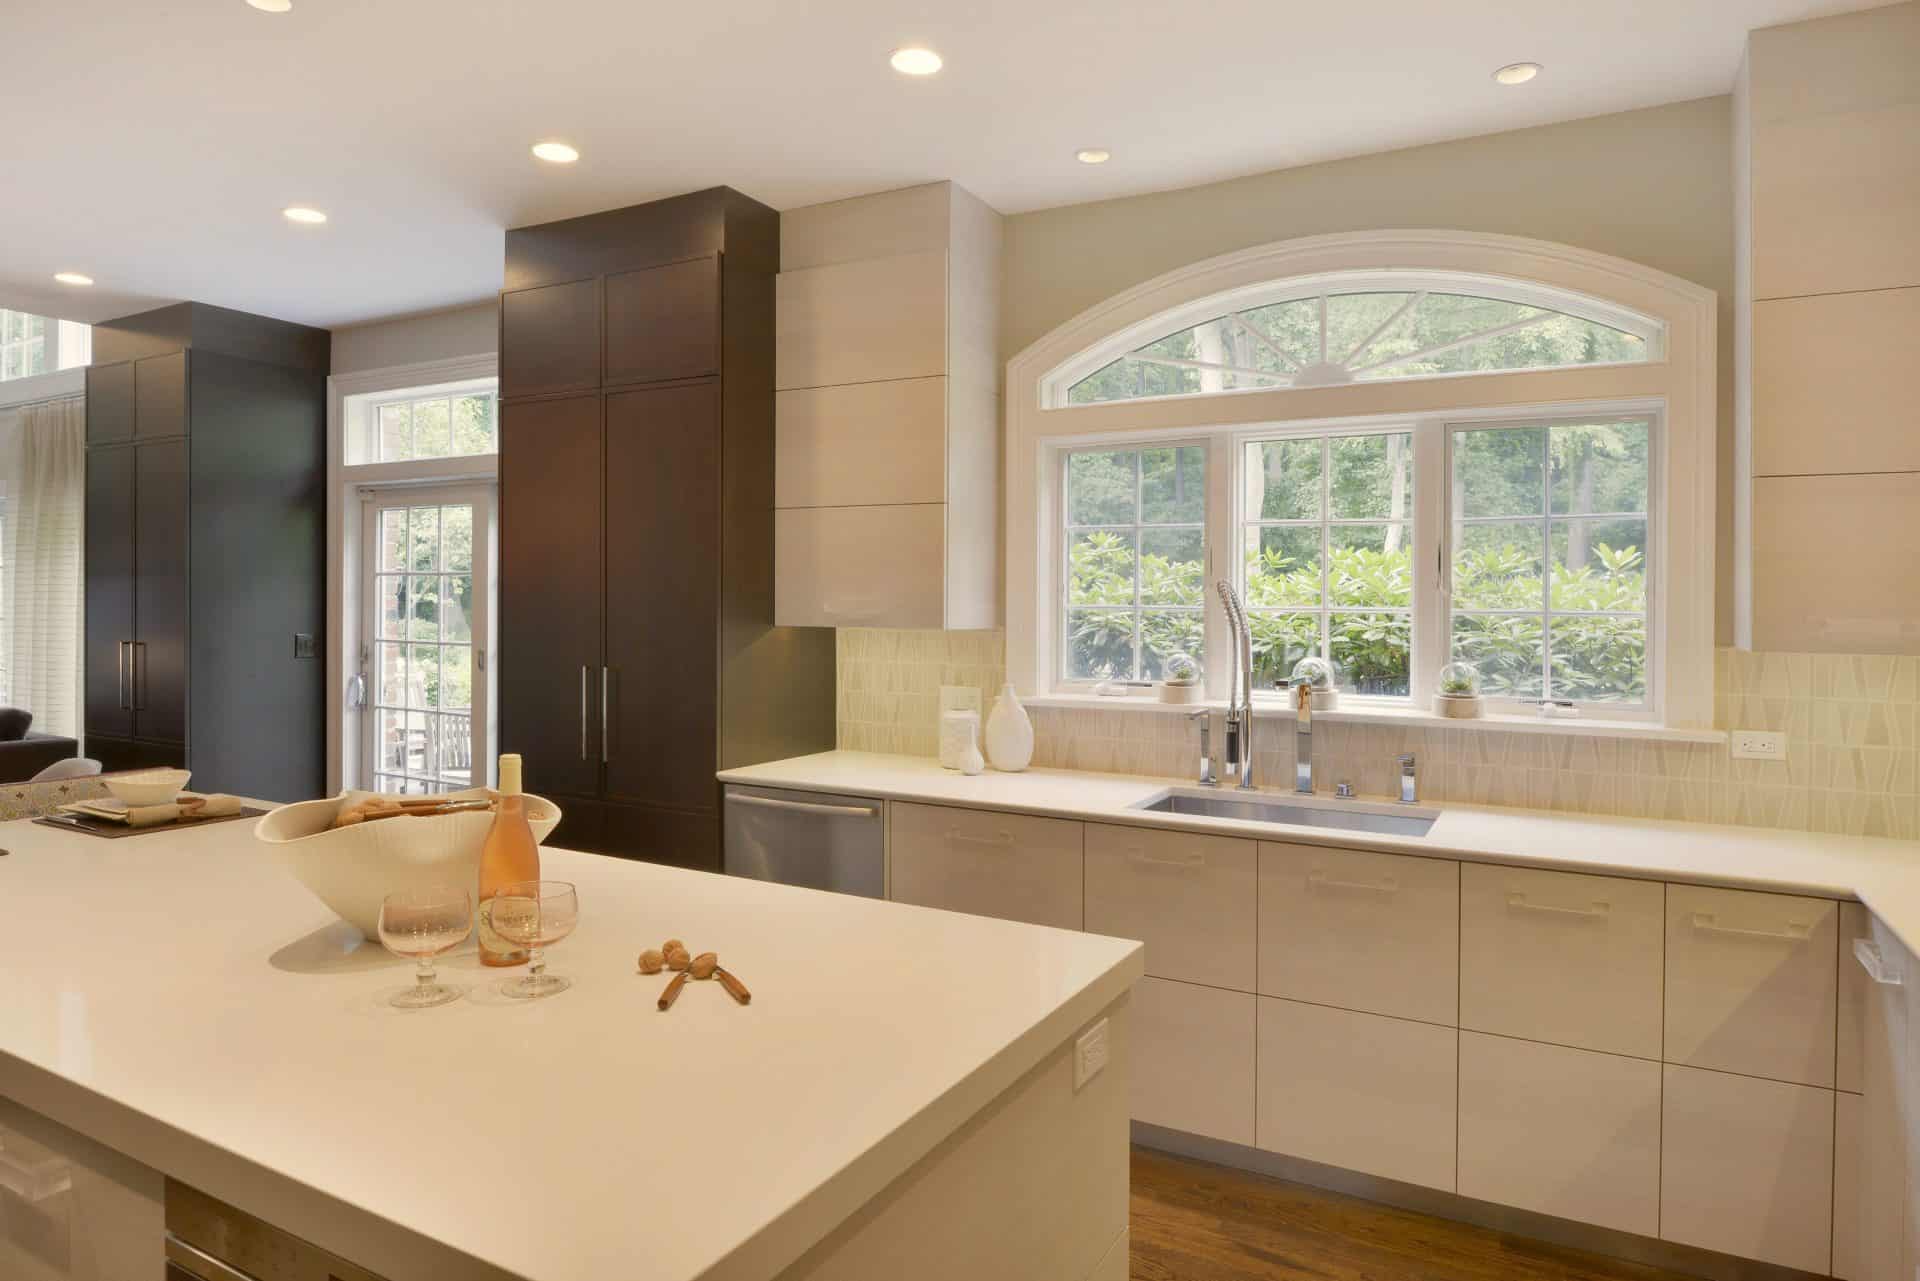 Custom Armonk, NY kitchen features custom, frameless Artcraft Cabinetry in a mix of walnut flat panel with white textured laminate.